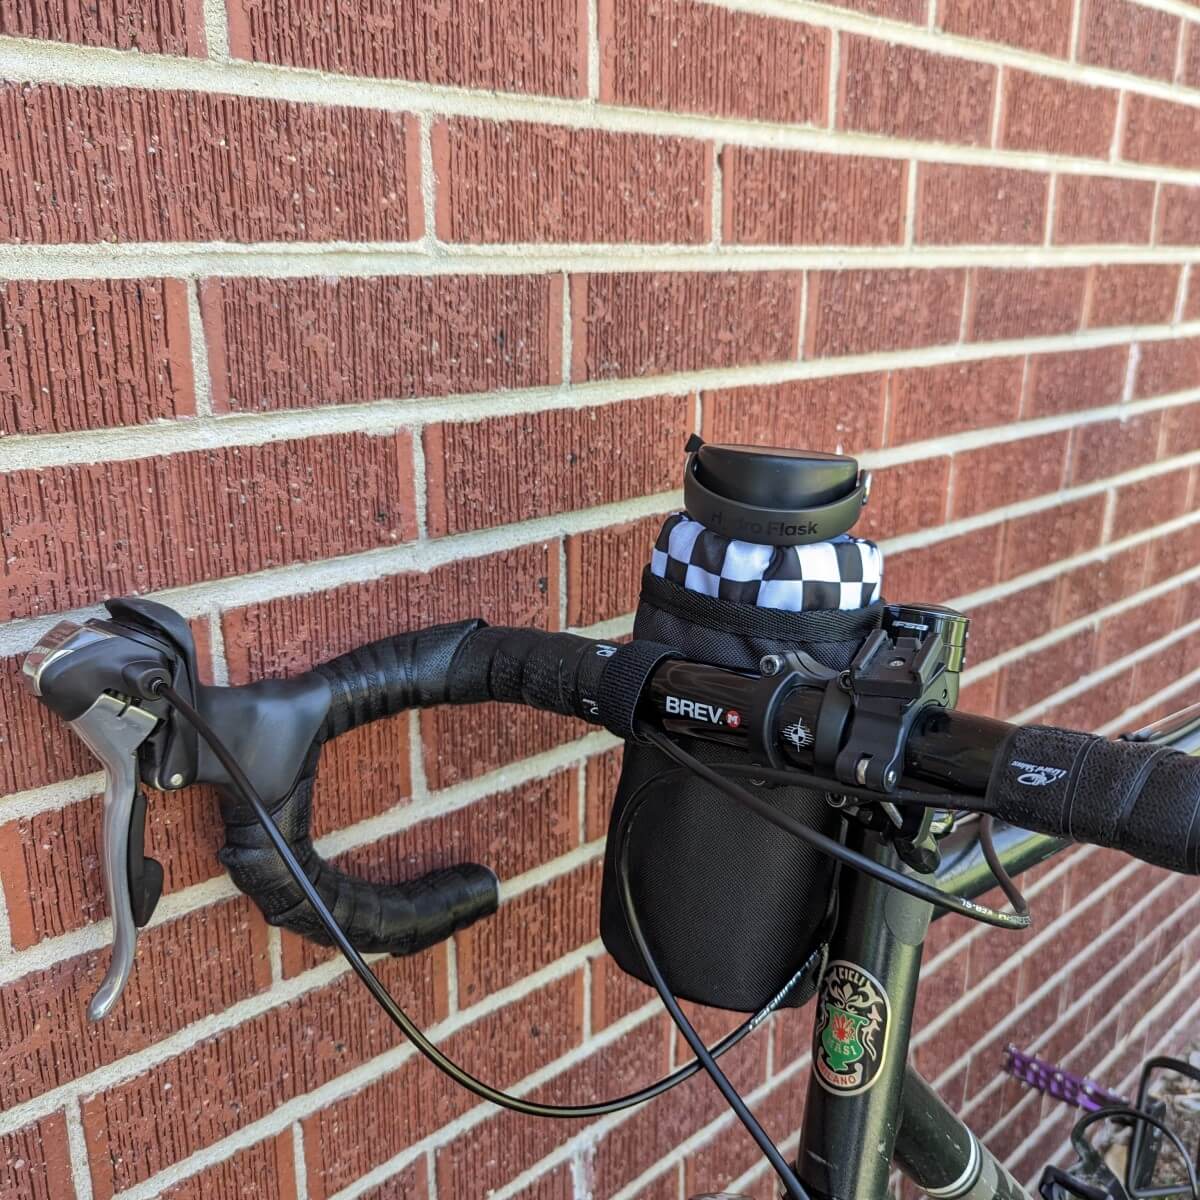 Road bike with stem bag and water bottle